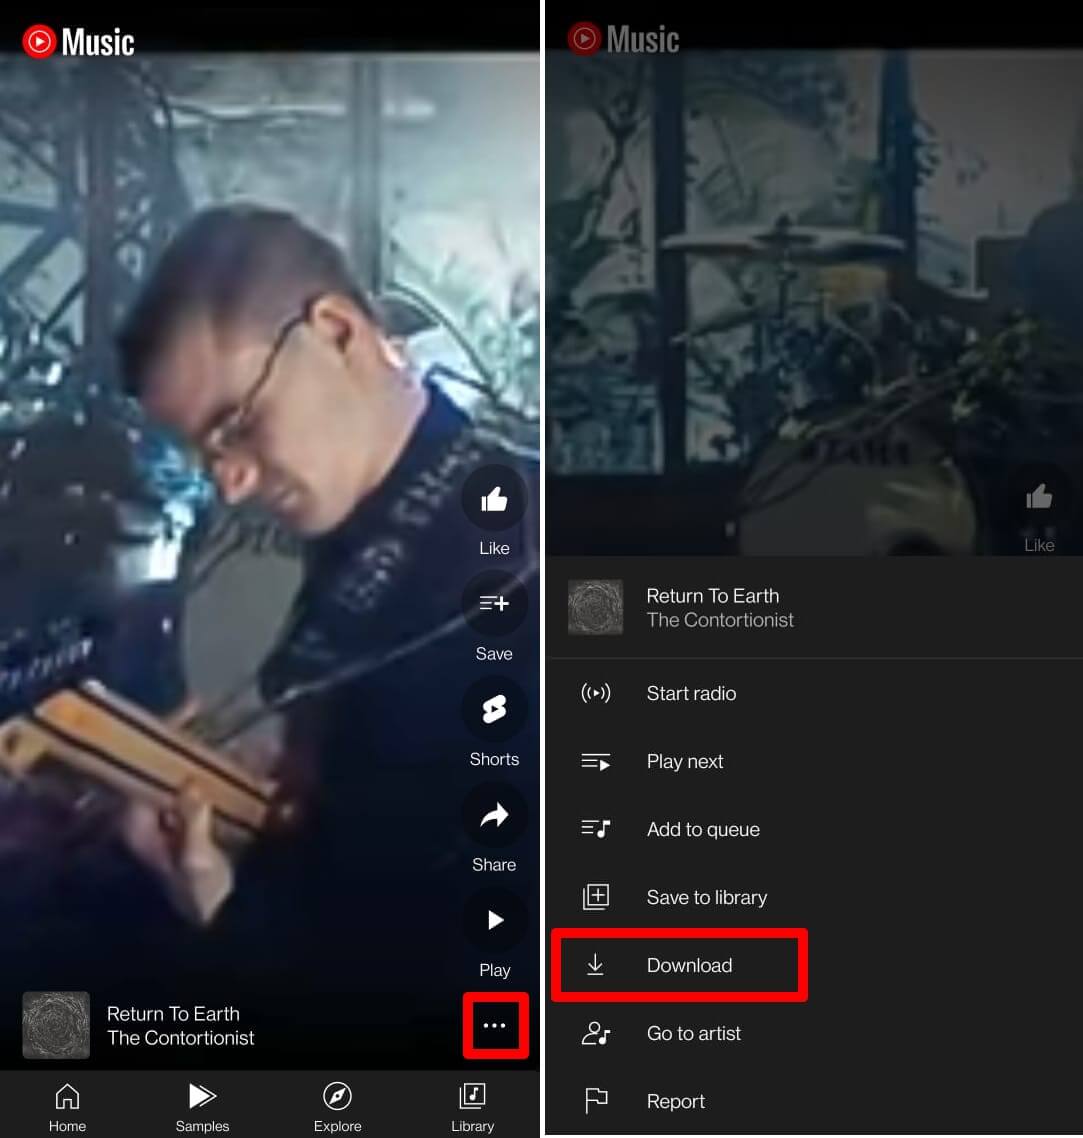 download a YouTube music sample